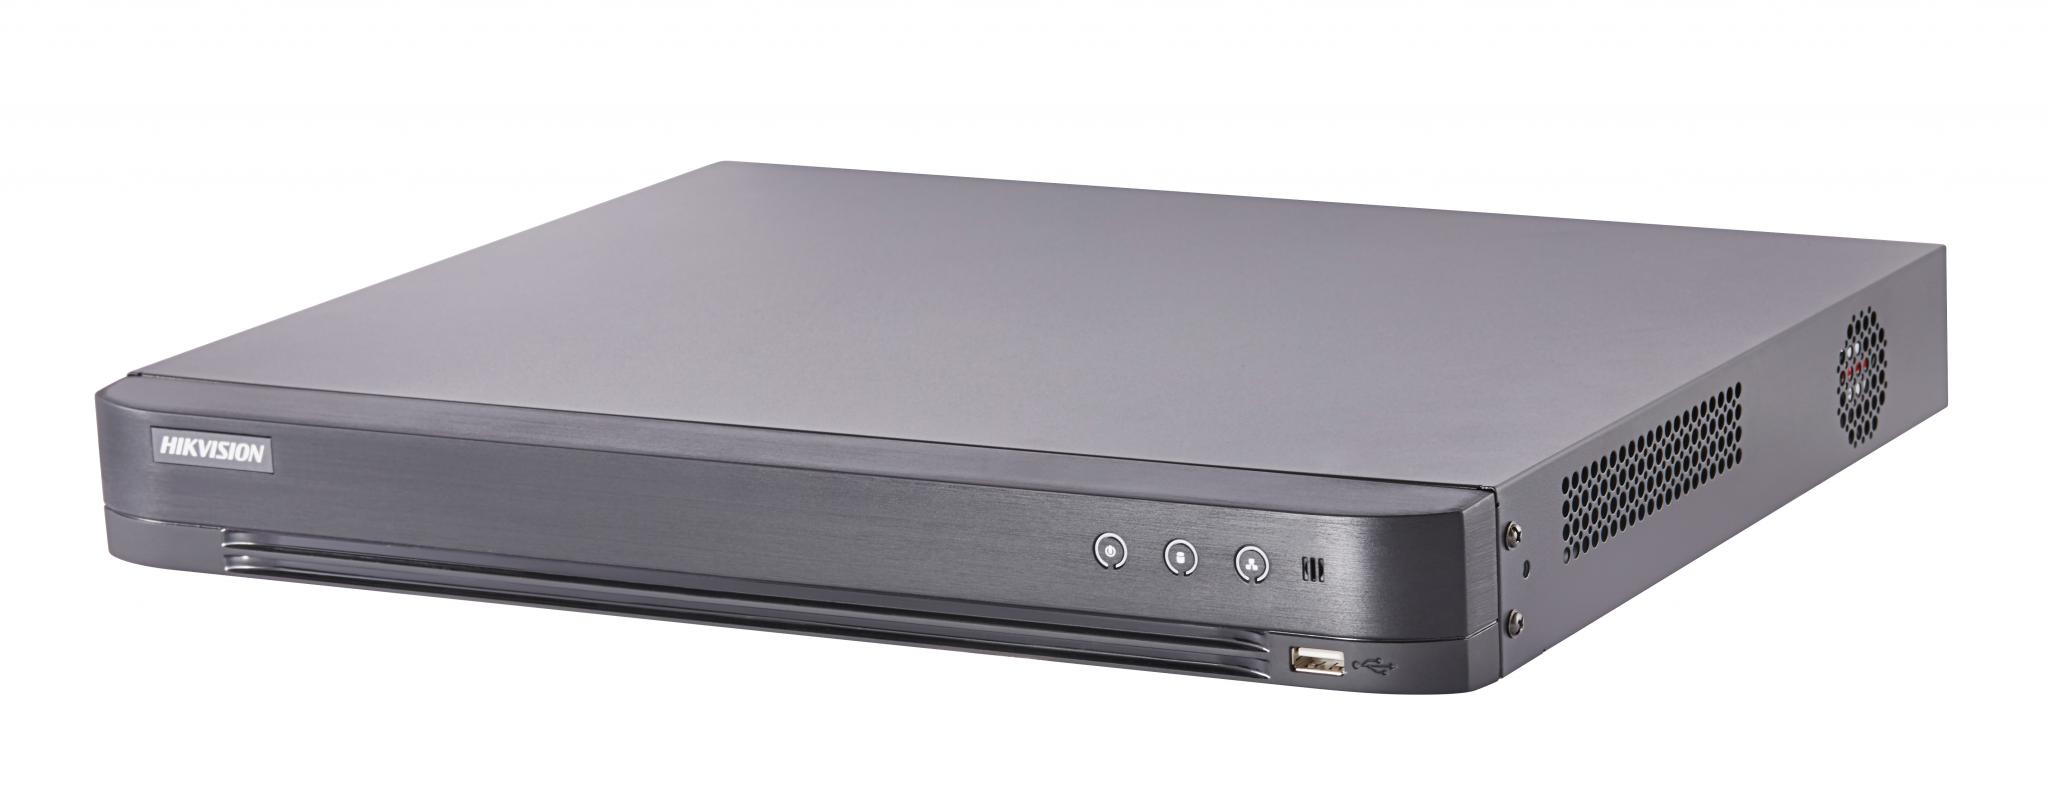 DVR Hikvision TurboHD 8 canale DS-7208HQHI-K2/P; 3MP; PoC - Power overcoax; 8 Turbo HD/AHD/Analog interface input, 8-ch video and 1-ch audioinput, H.265/H.265+ compression, 2 SATA interfaces, CH01 and 02: 3MP @15fps, CH03-08:1920×1080P @15 fps/ch, support CVBS output, 380 1U case,built-in PoC.